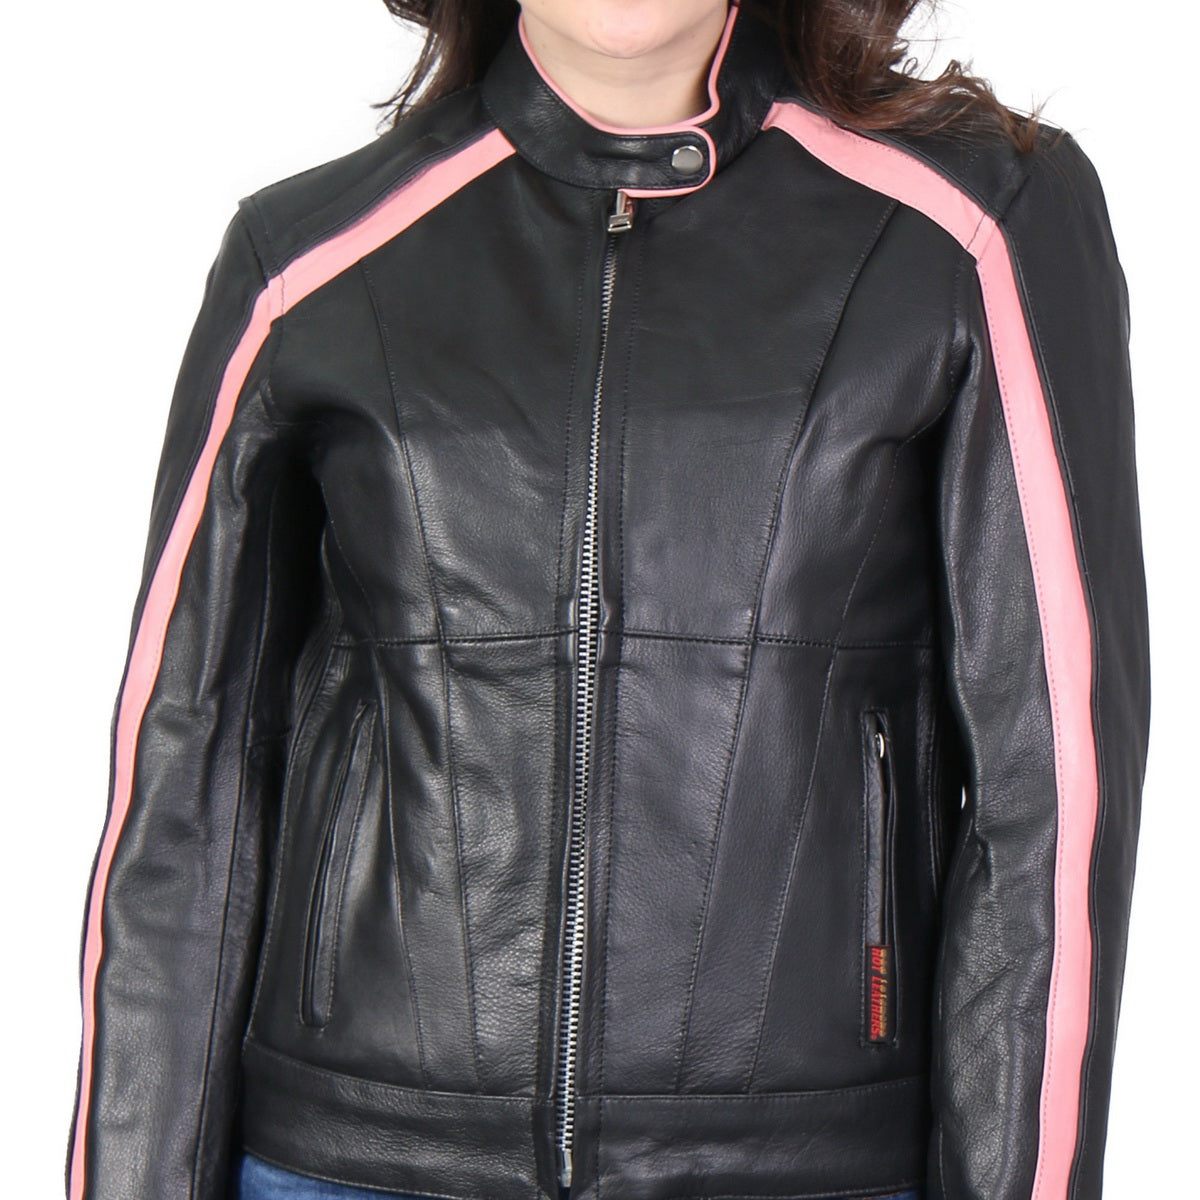 Hot Leathers JKL1022 Pink Striped Leather Jacket with Reflective Piping